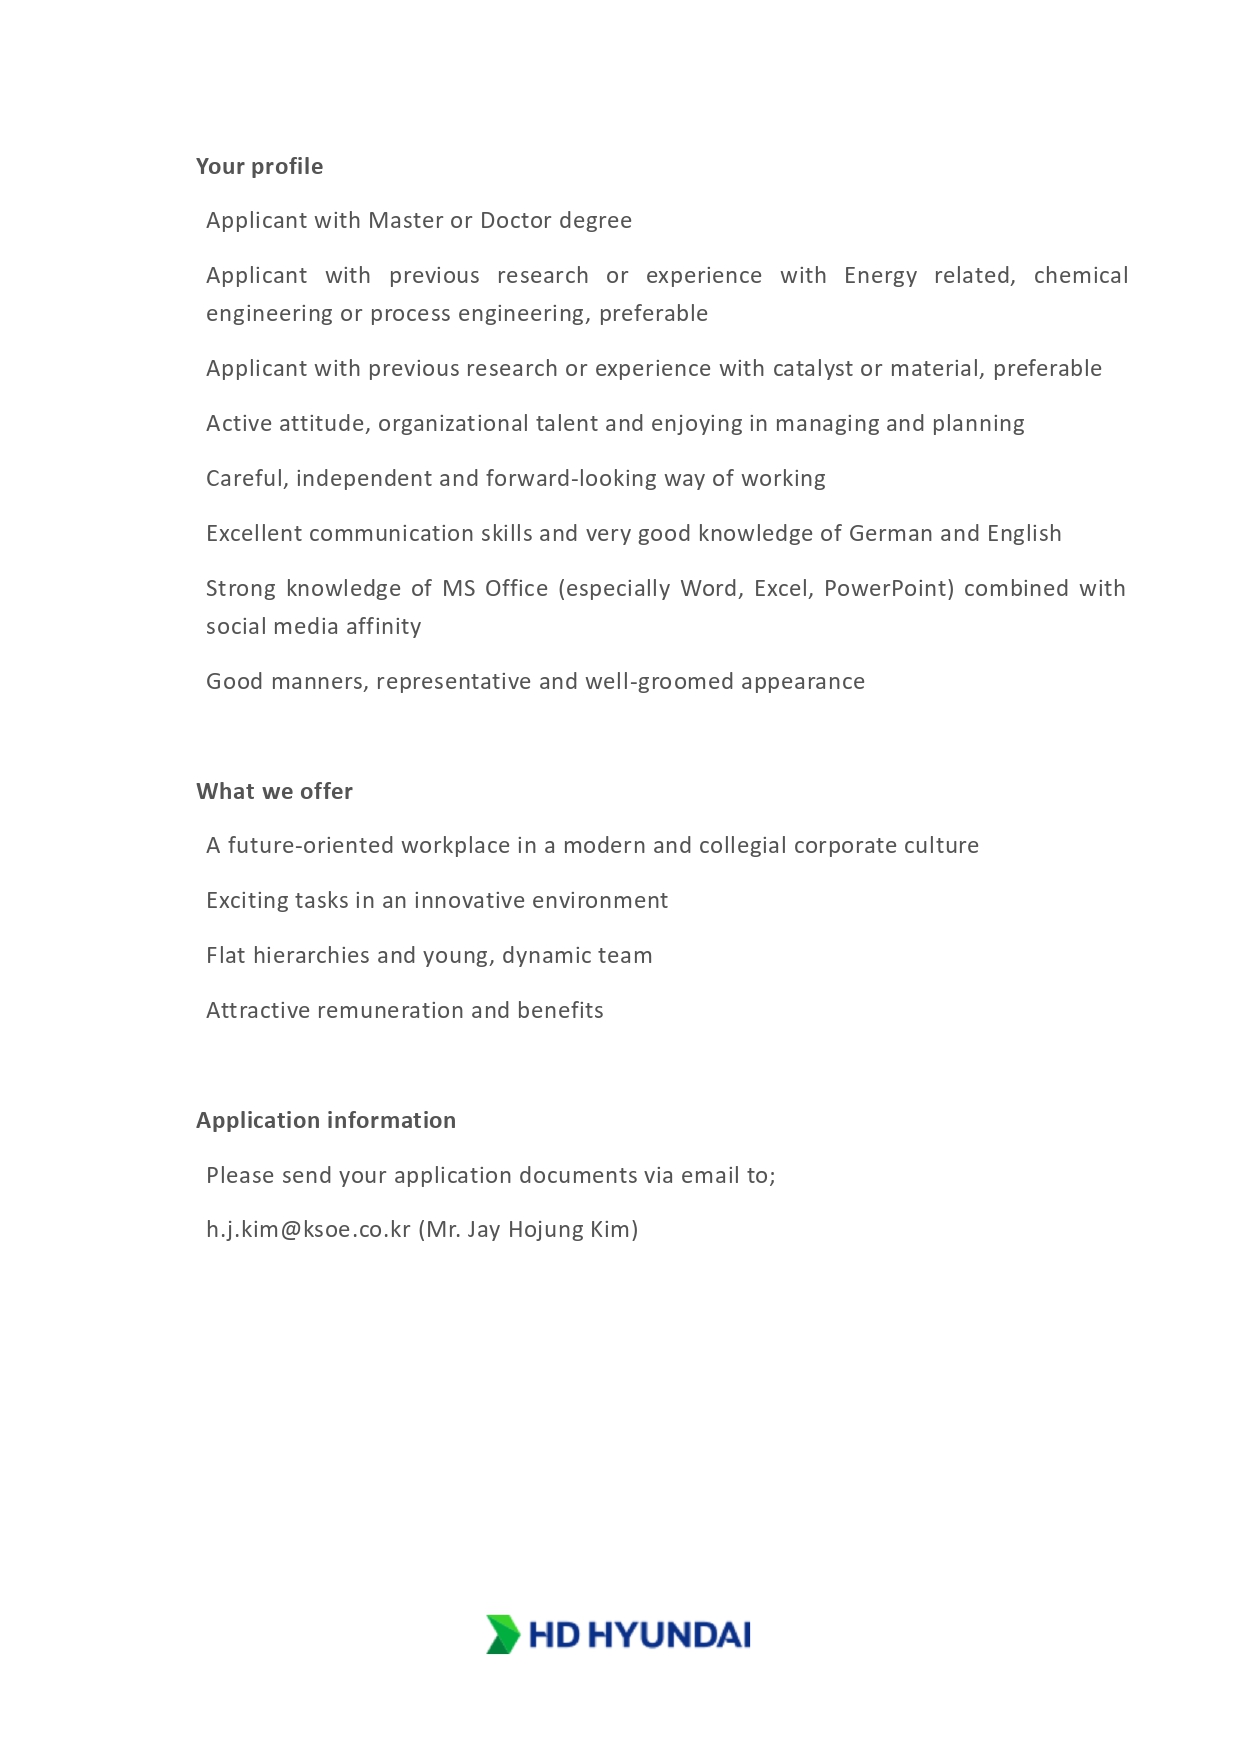 (HD Hyundai, KSOE Europe Research Center) Job vacancy for R&D planning_page-0002.jpg